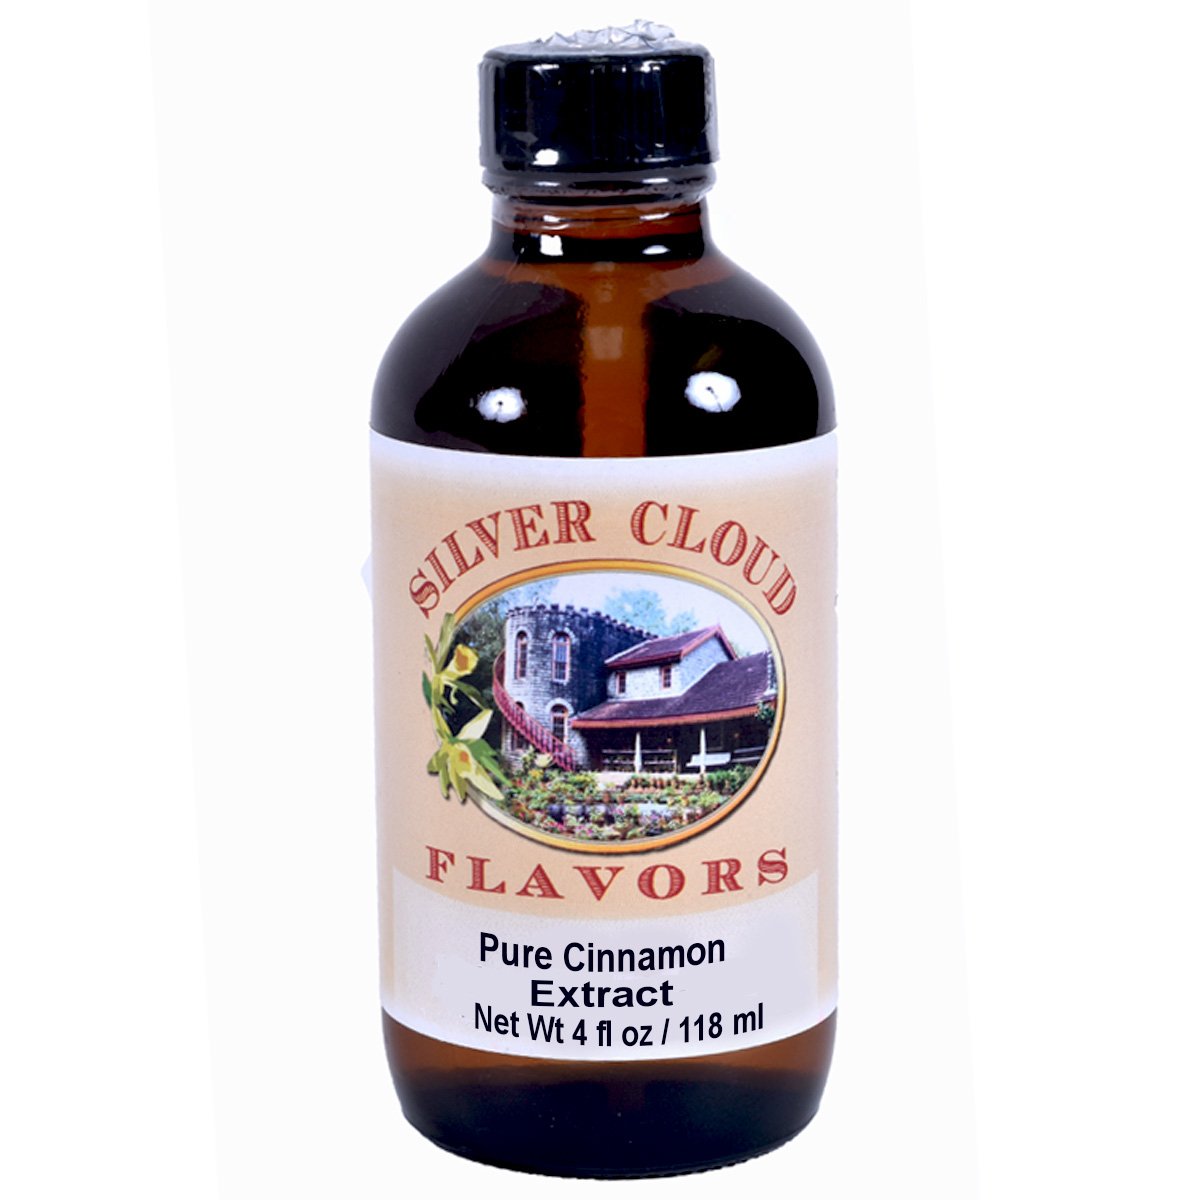 Pure Cinnamon Extract Silver Cloud Extract - Bake Supply Plus